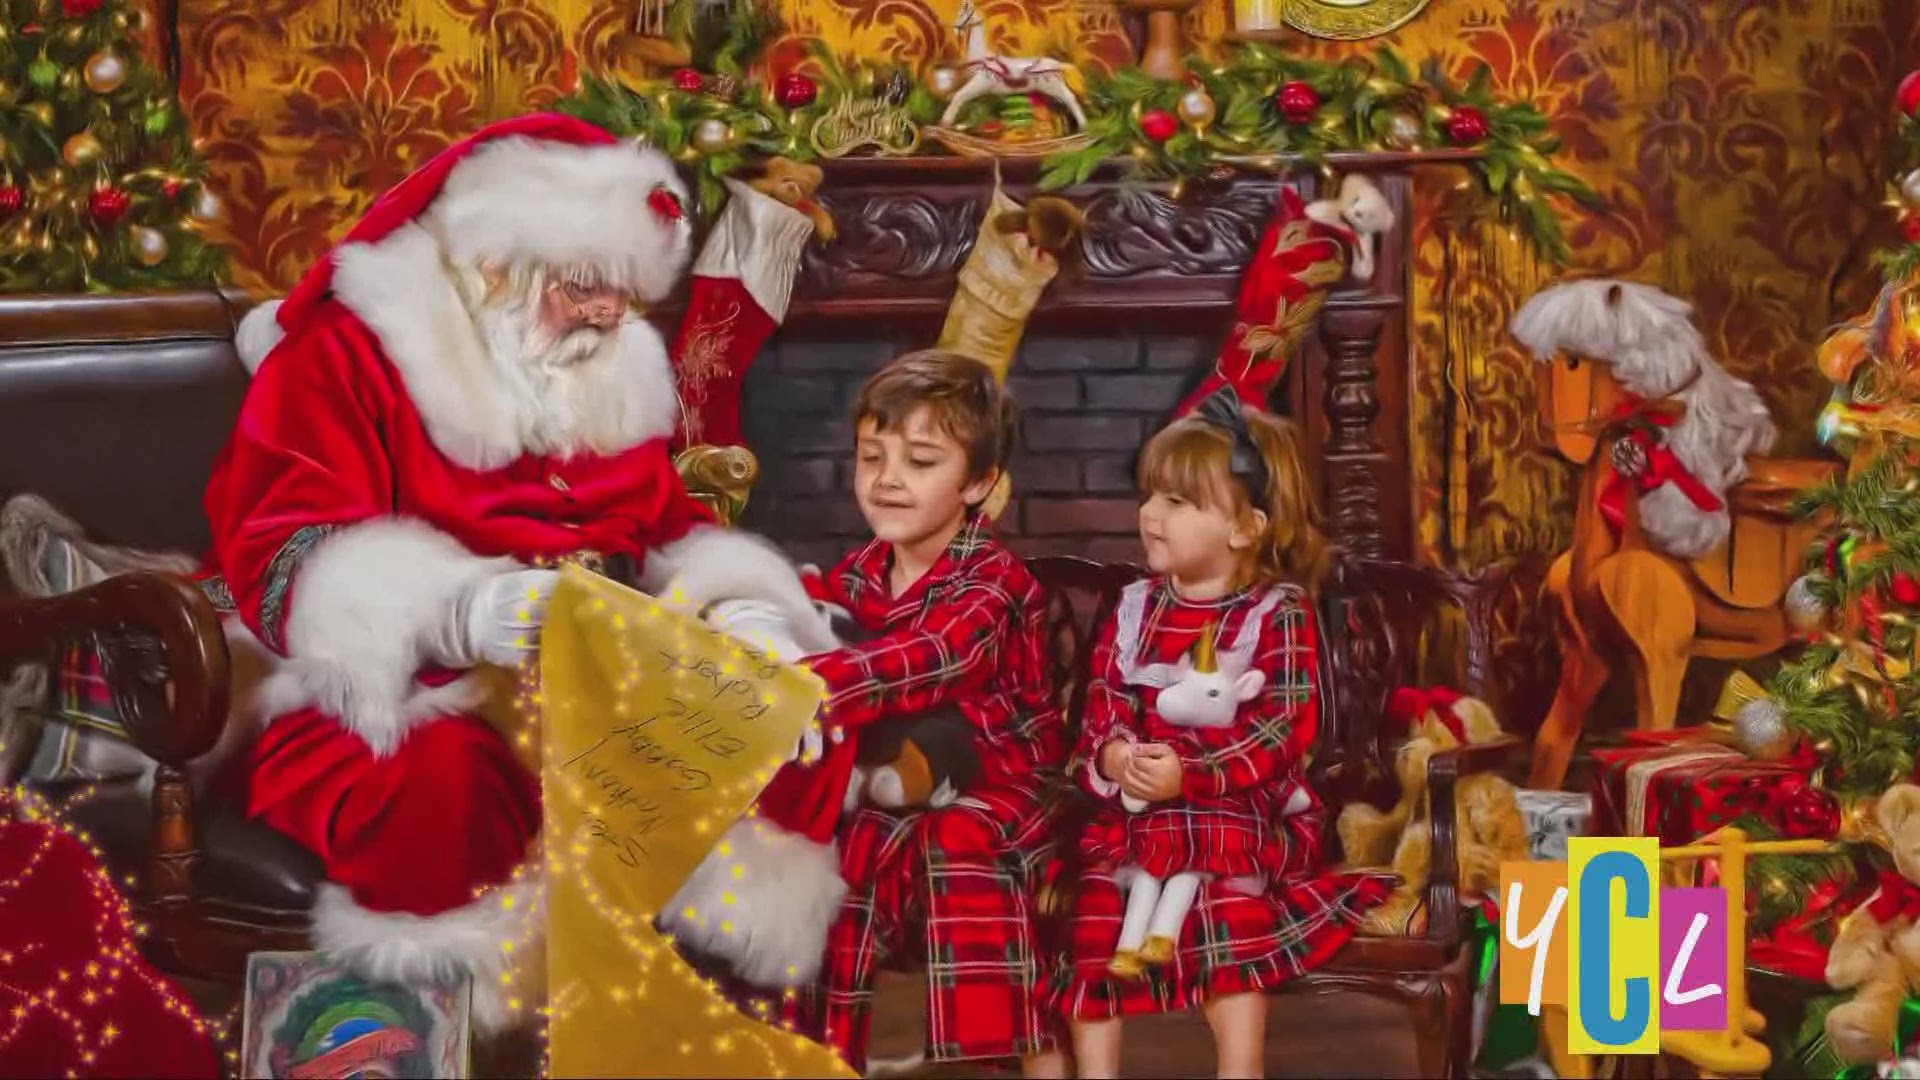 Lean about the special portrait sessions that offers children a chance to share their Christmas wish list with Santa.